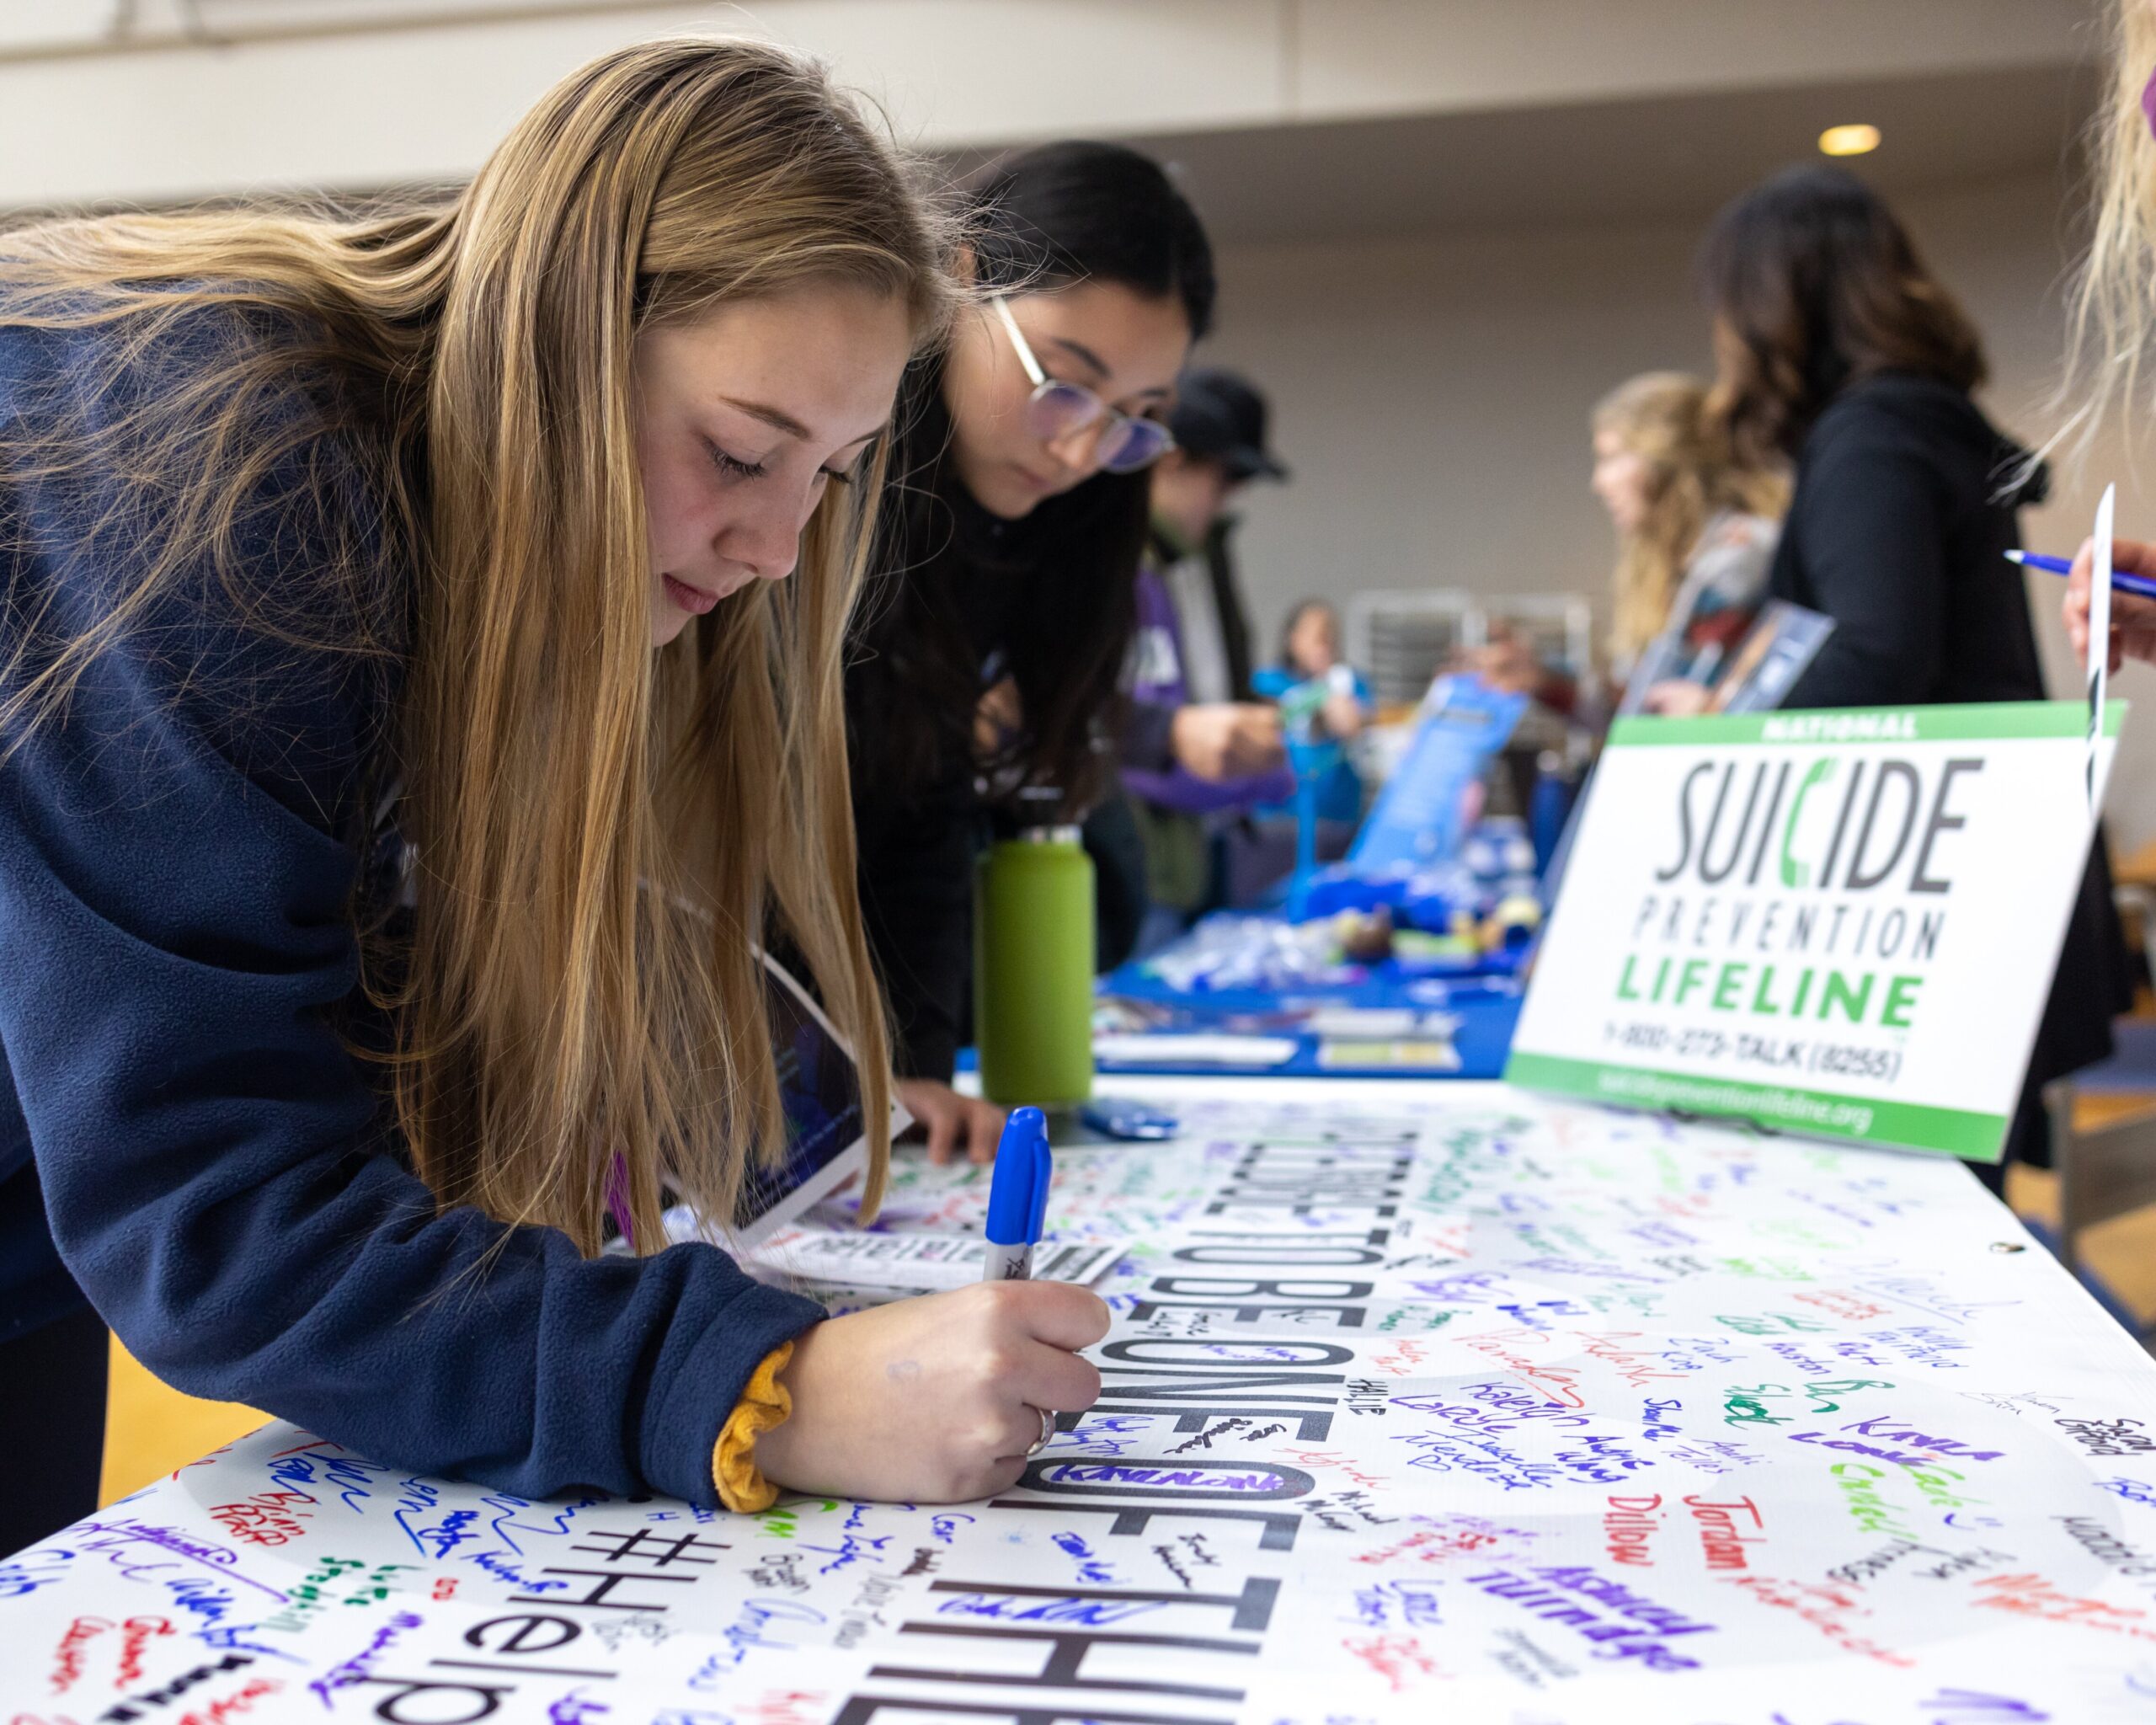 Student signs the Nine out of Ten pledge to be aware, speak up, reach out and help someone.